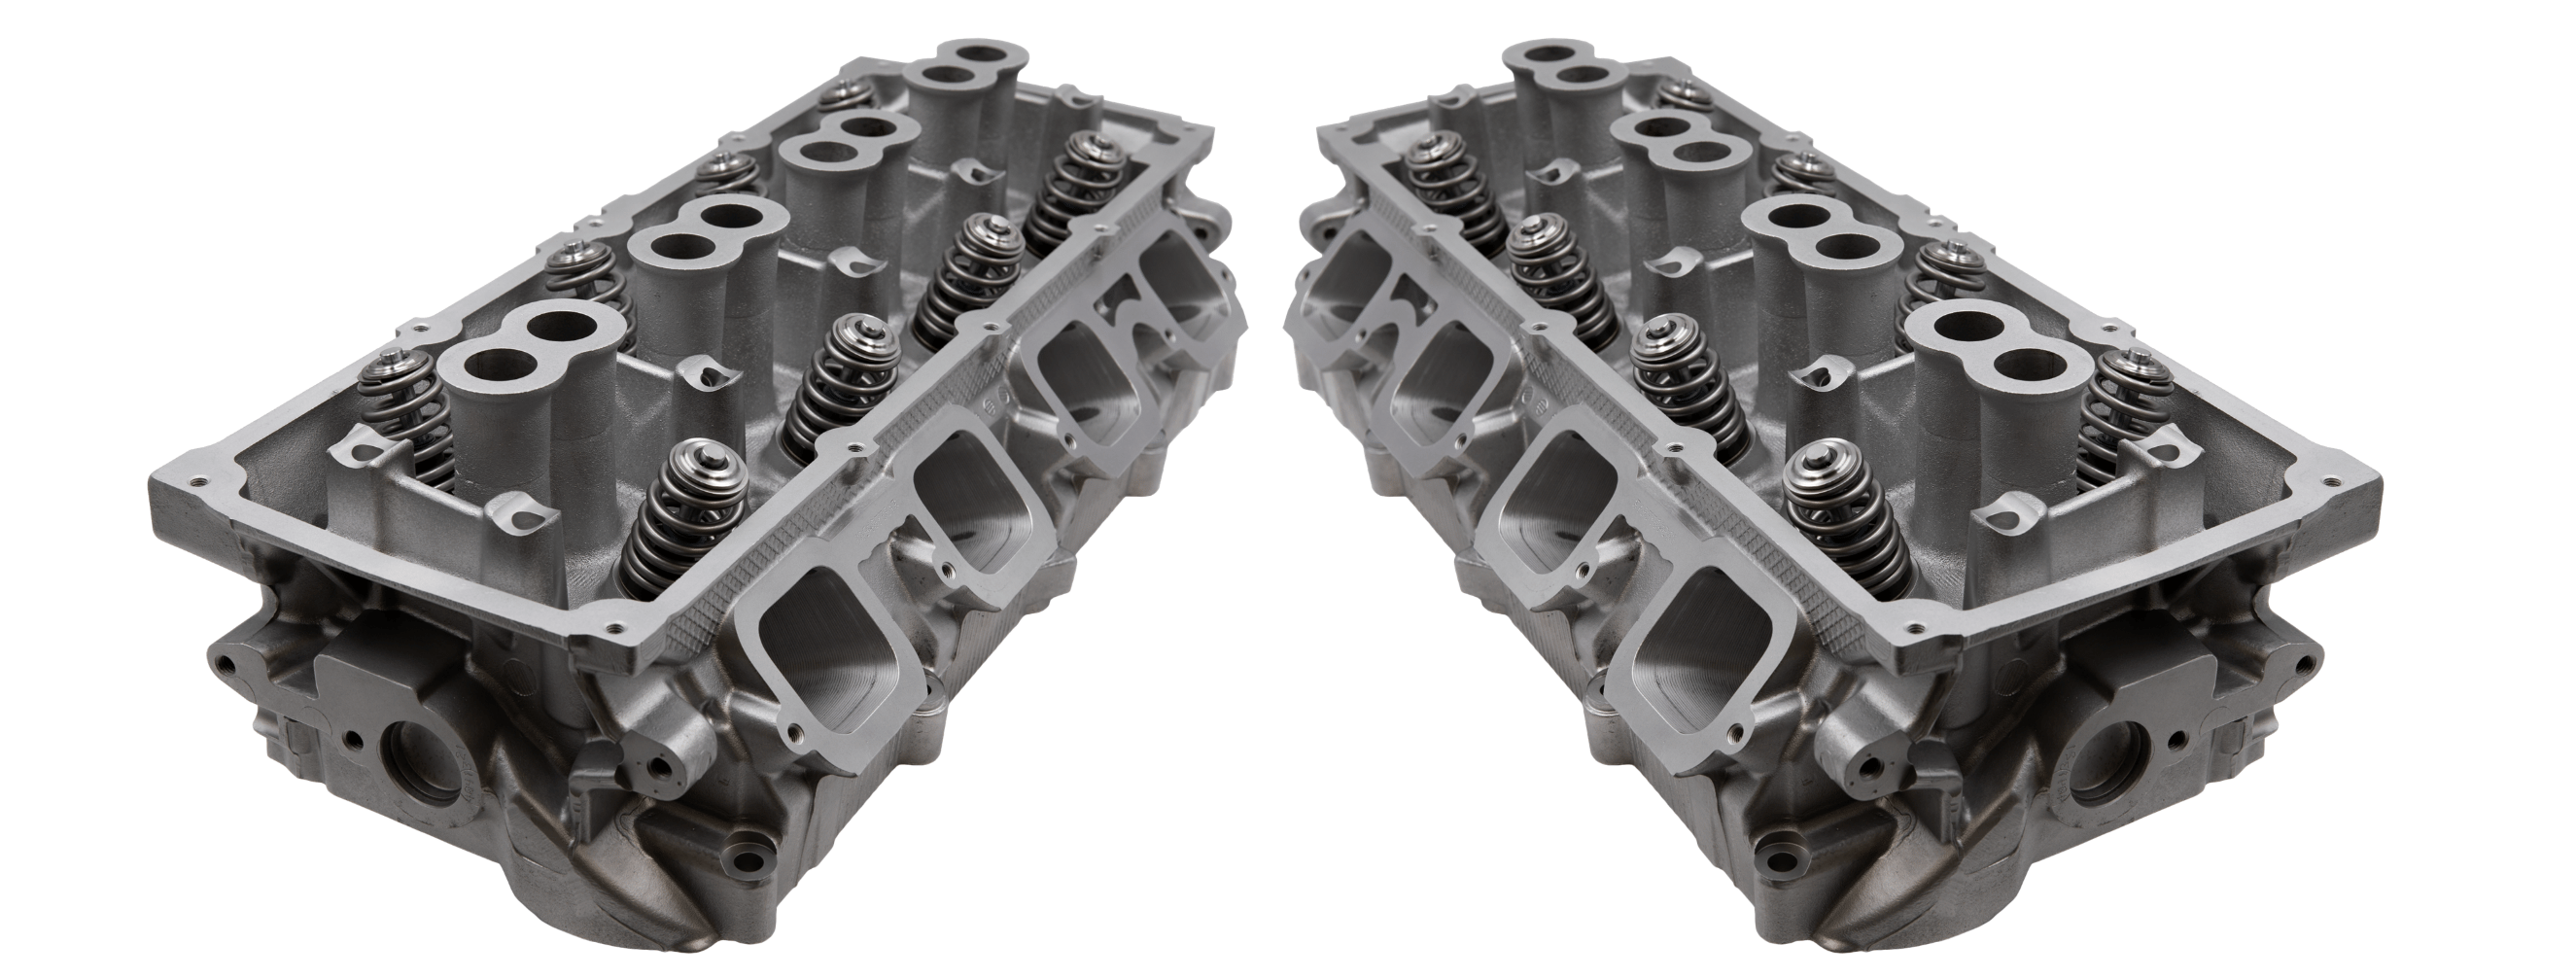 HHP Racing CNC Ported Cylinder Head Pair by BES Racing Engines for 6.1L Hemi Questions & Answers